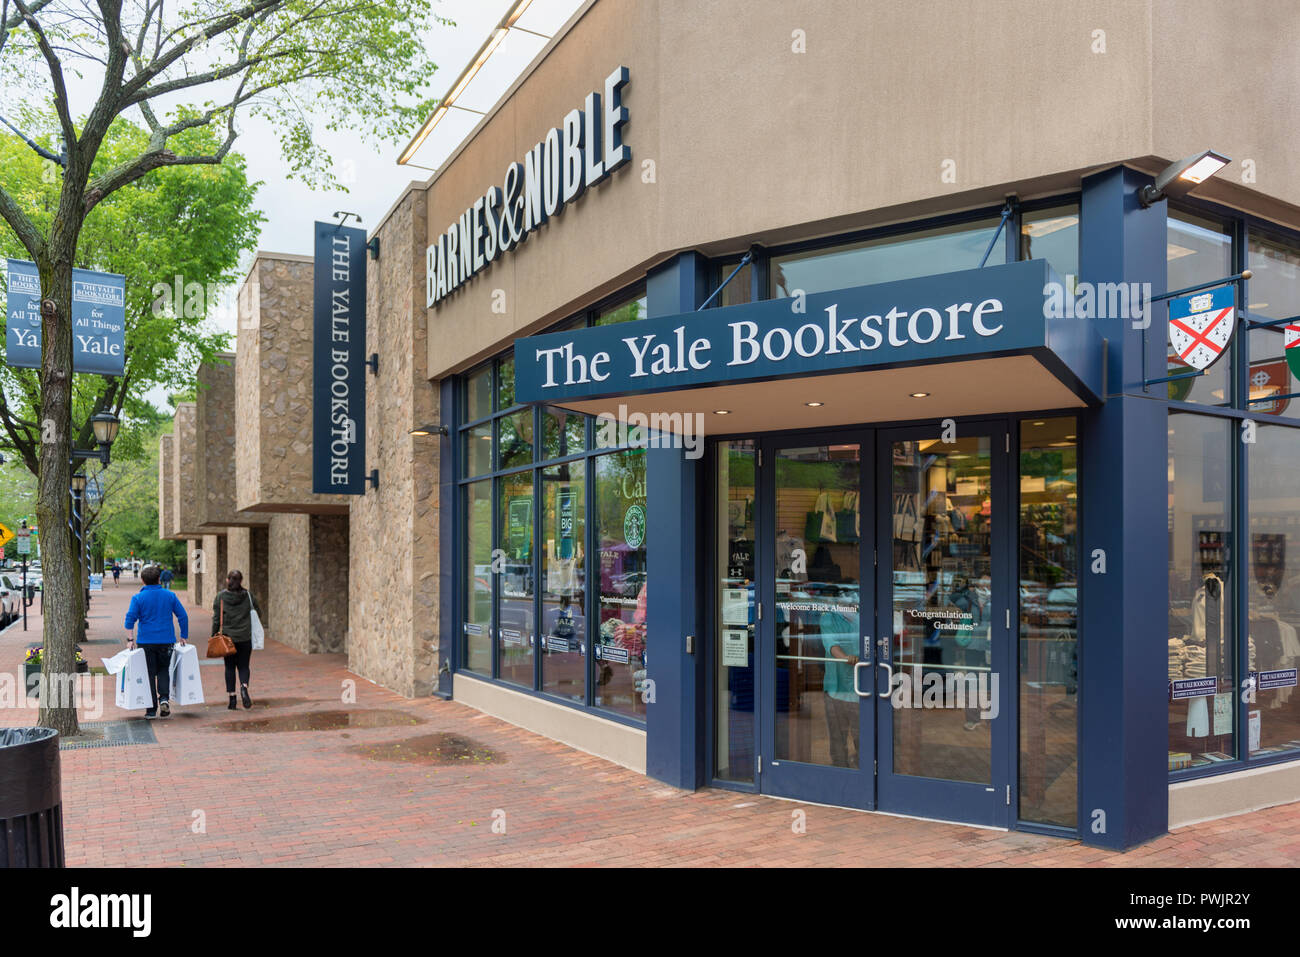 Yale Bookstore in New Haven, CT, USA. Yale is a private Ivy League research university in New Haven, CT, USA and was founded in 1701. Stock Photo